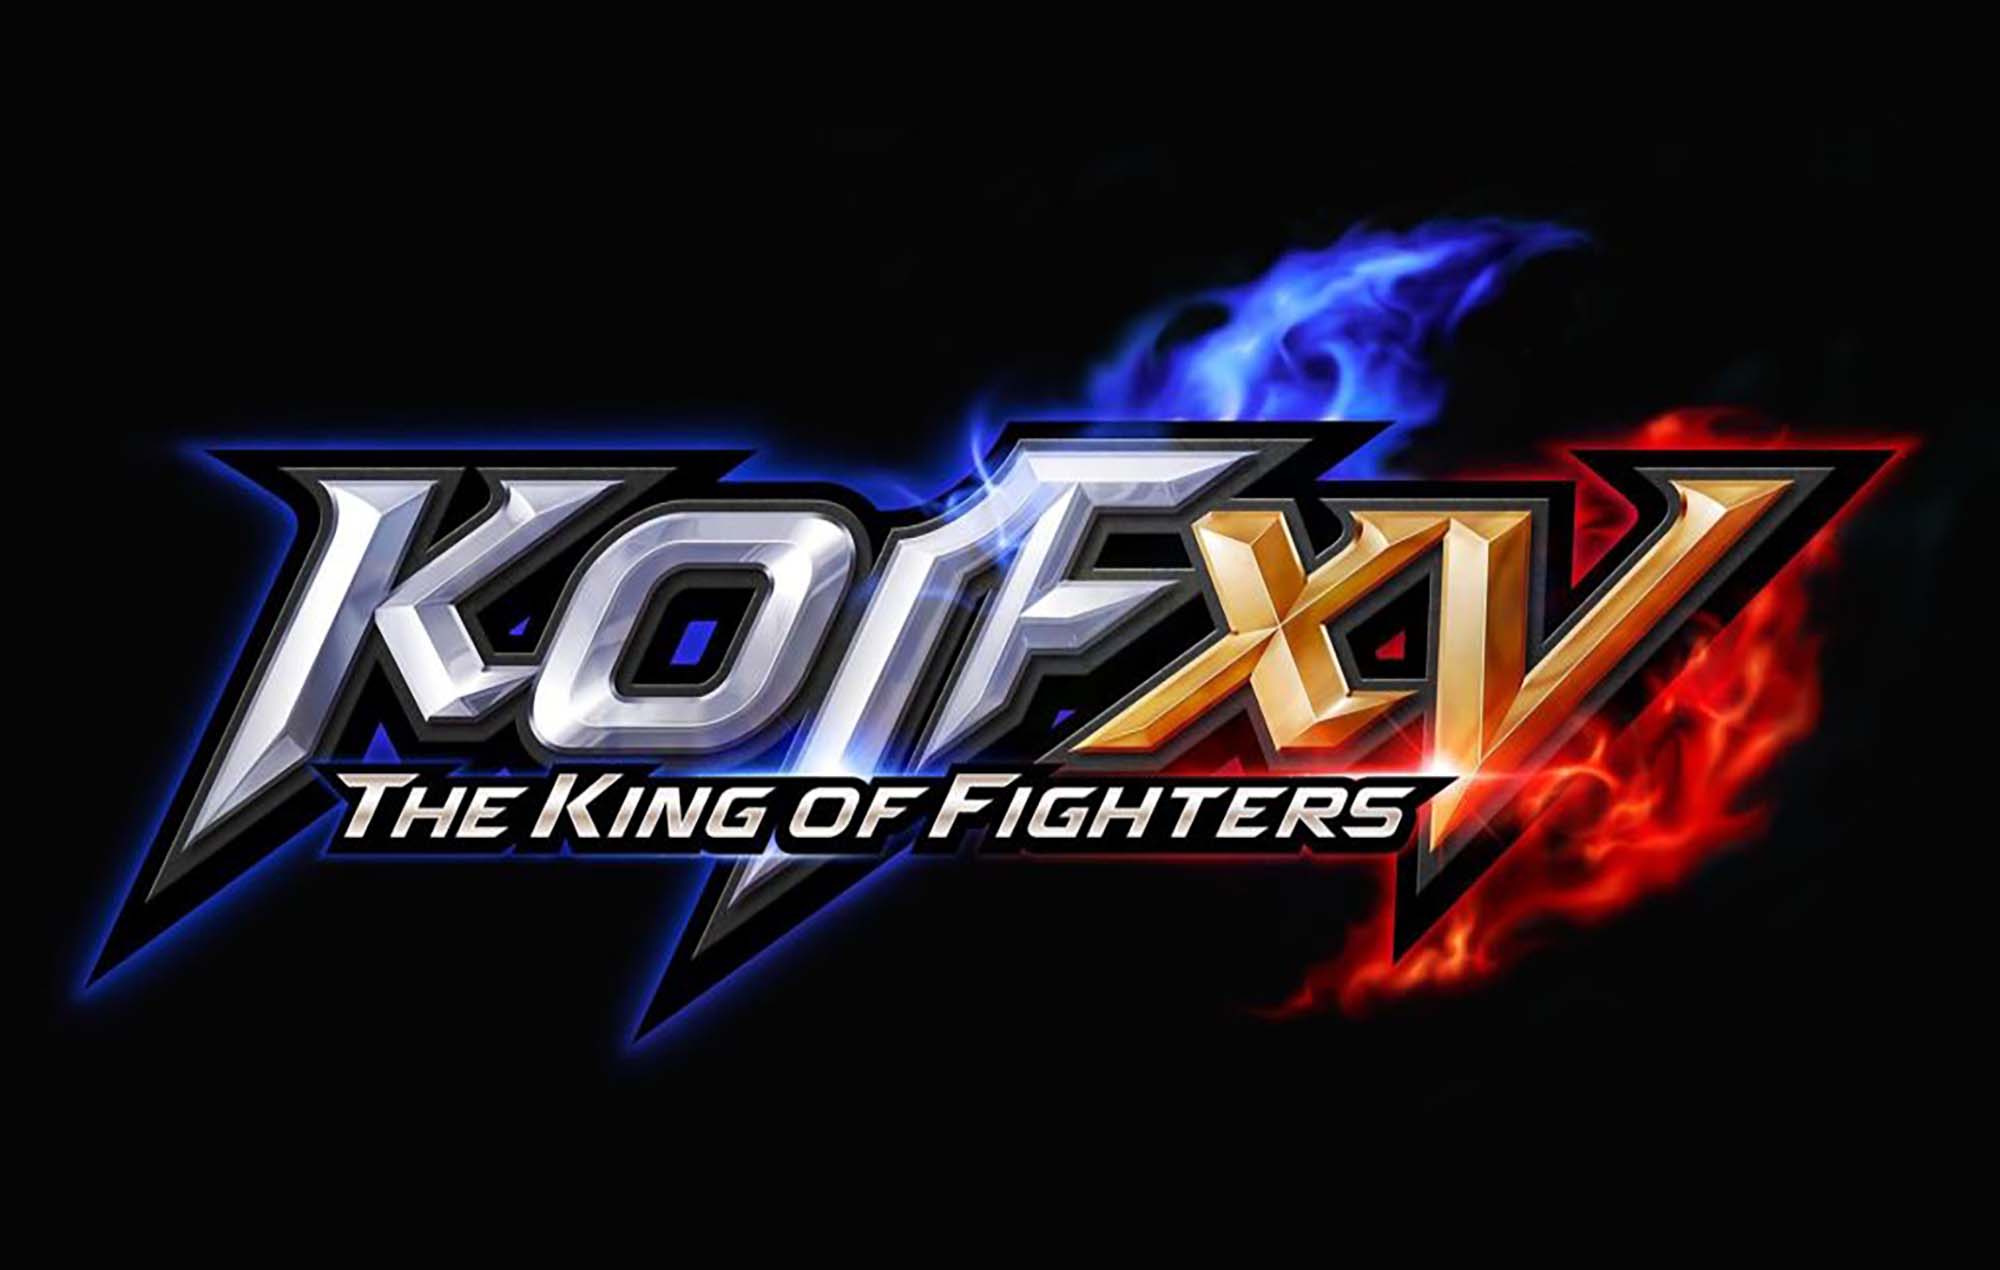 King of Fighters XV' trailer revealed following leaked image